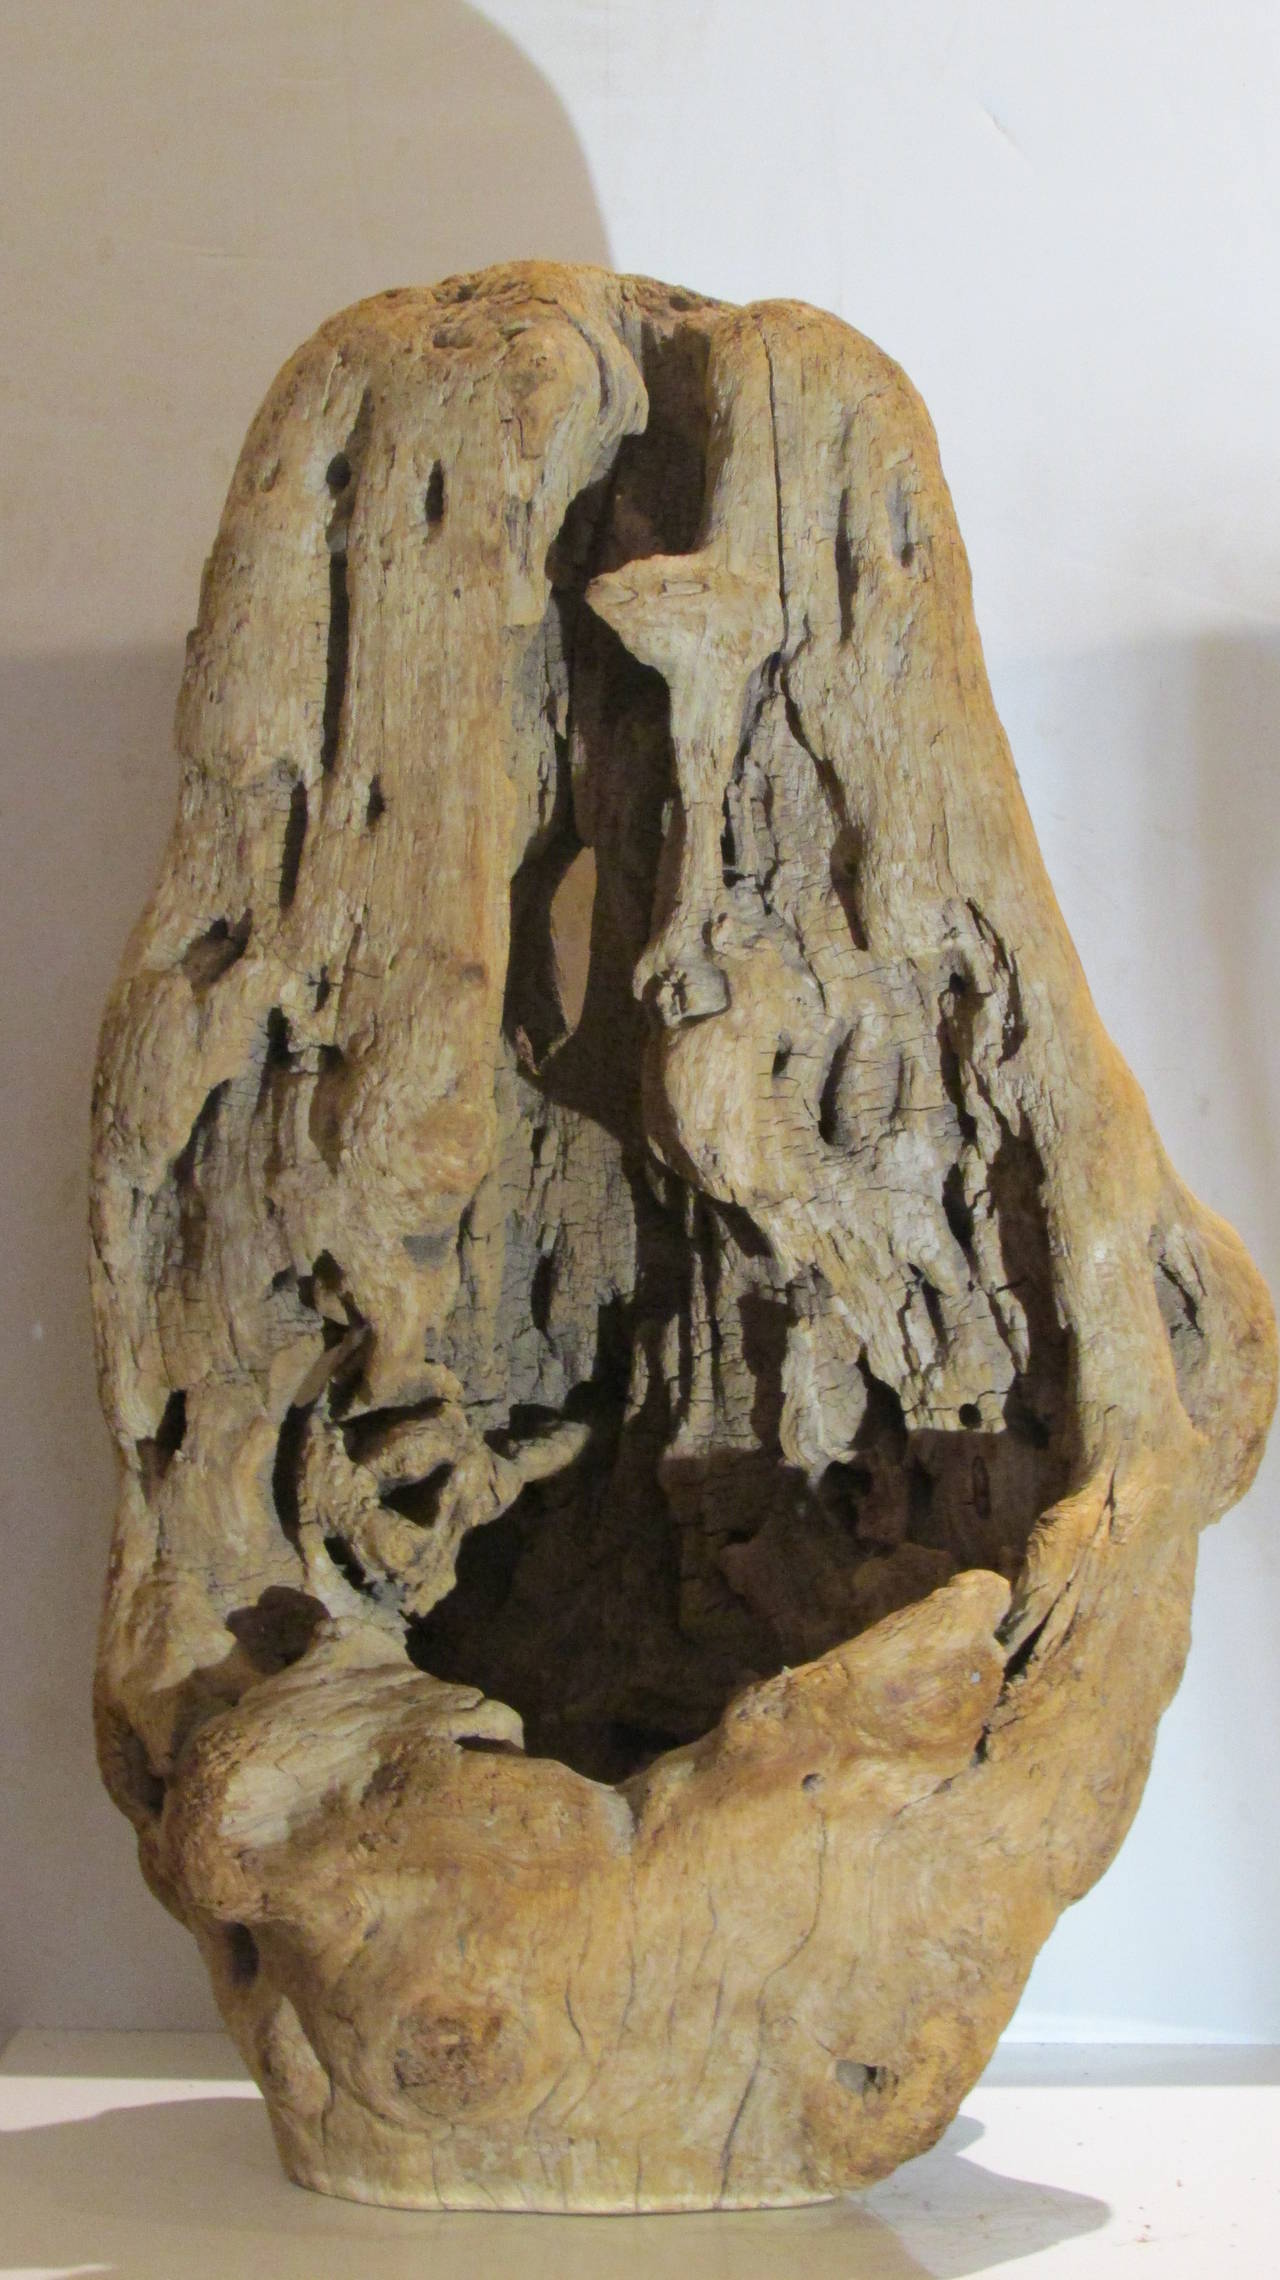 A very old piece of knobby burl driftwood with an ancient presence and perfectly aged color and surface, a beautiful as found natural sculpture object.